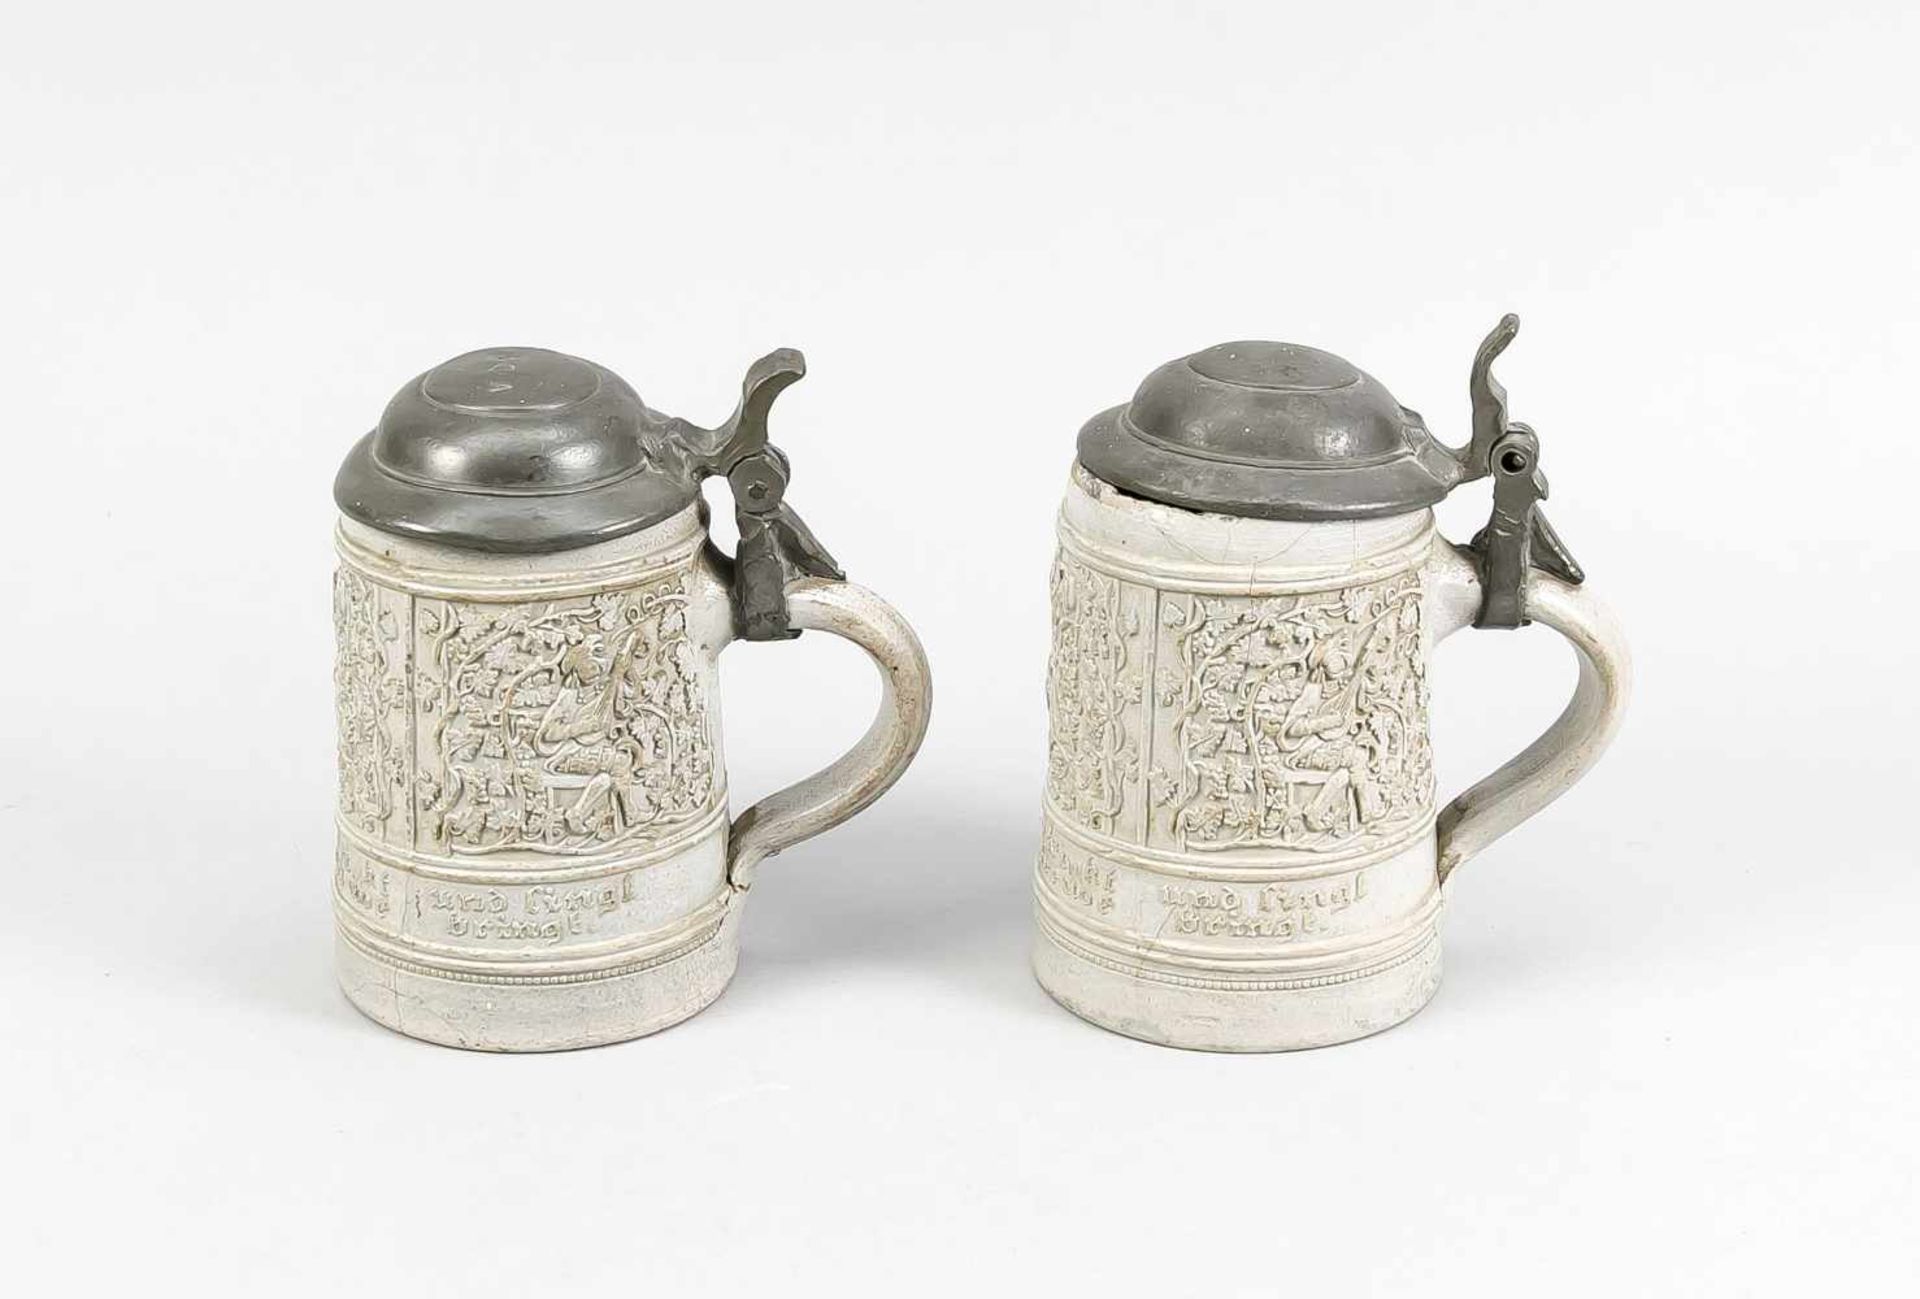 Two 18th - 19th century gray stoneware drinking jugs with texts and vines decor. Chips +